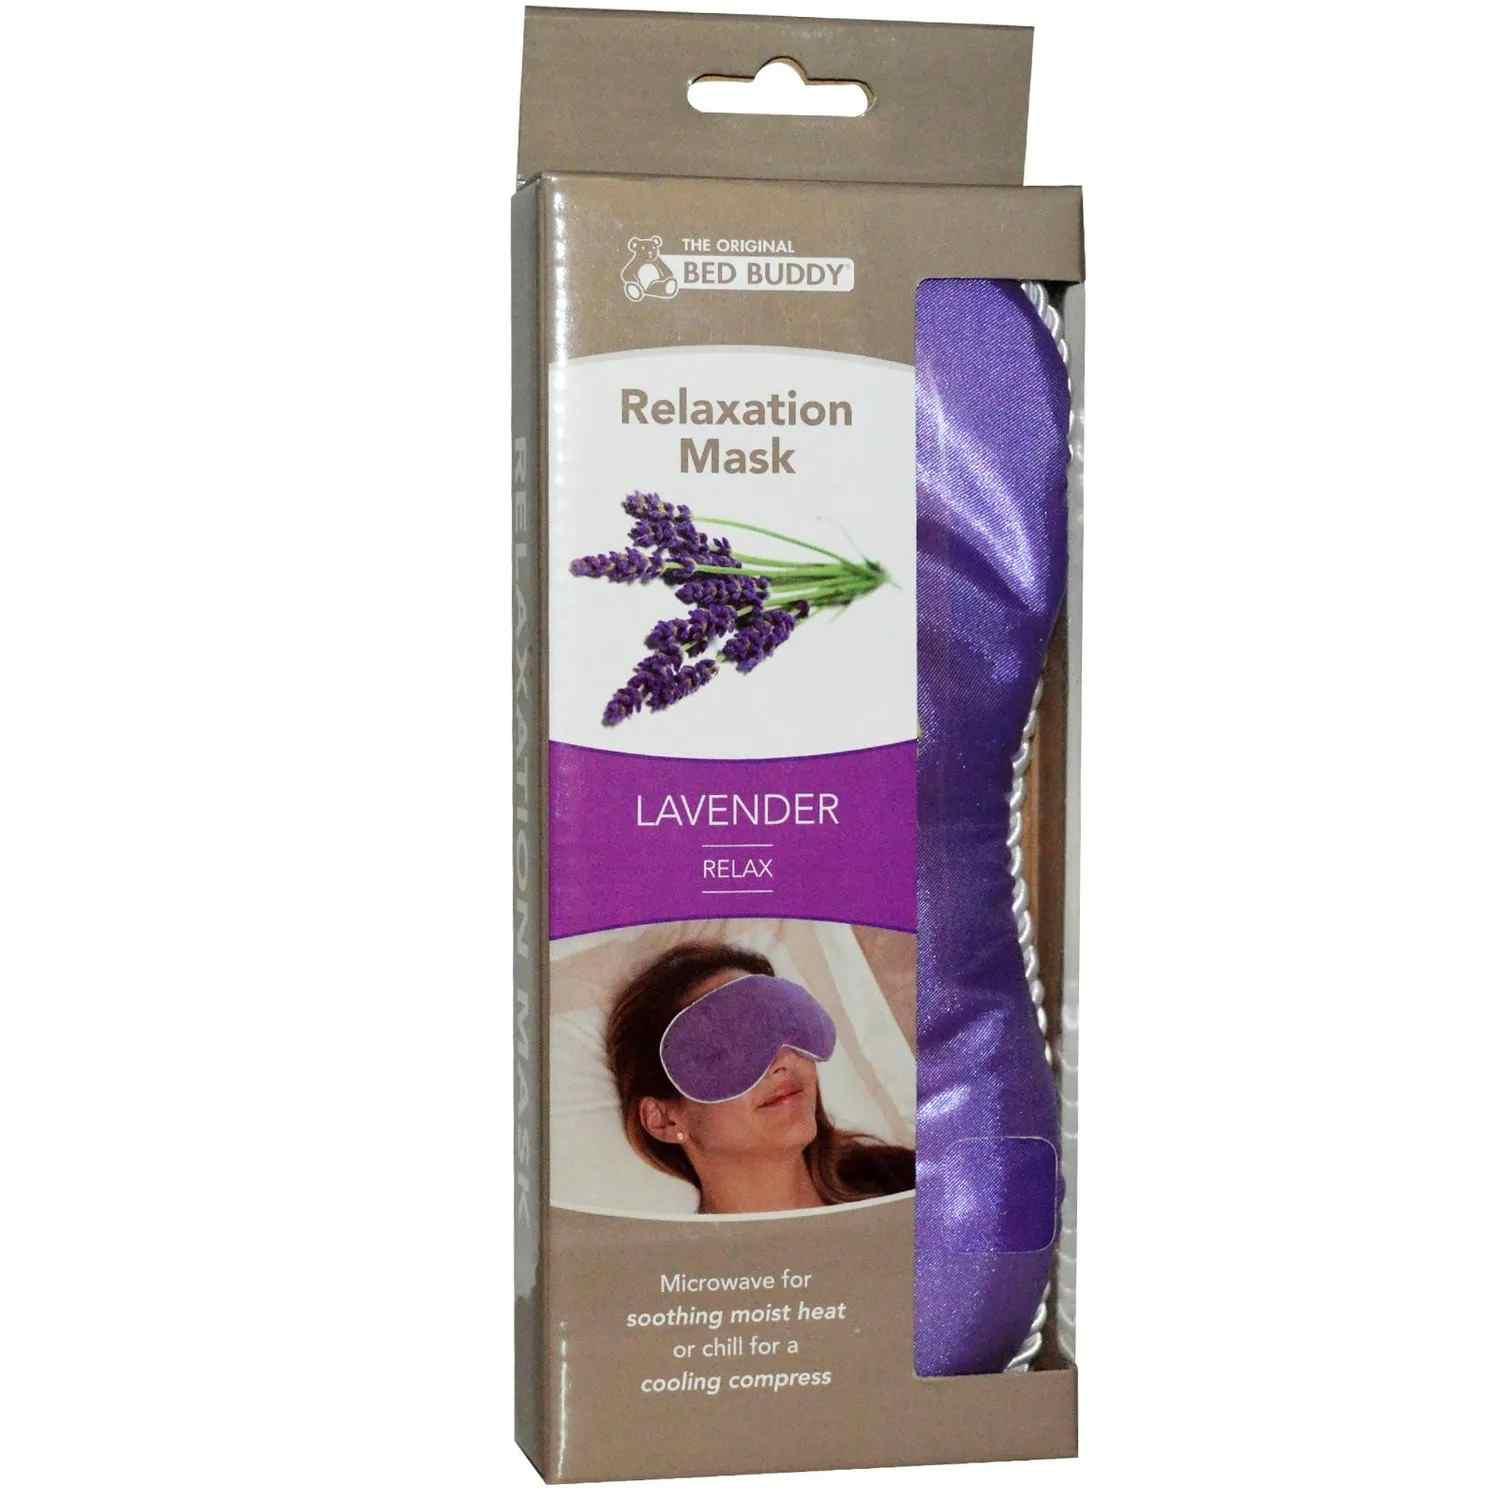 Bed Buddy at Home Relaxation Mask, Lavender Fragrance, BBF4006, 1 Each